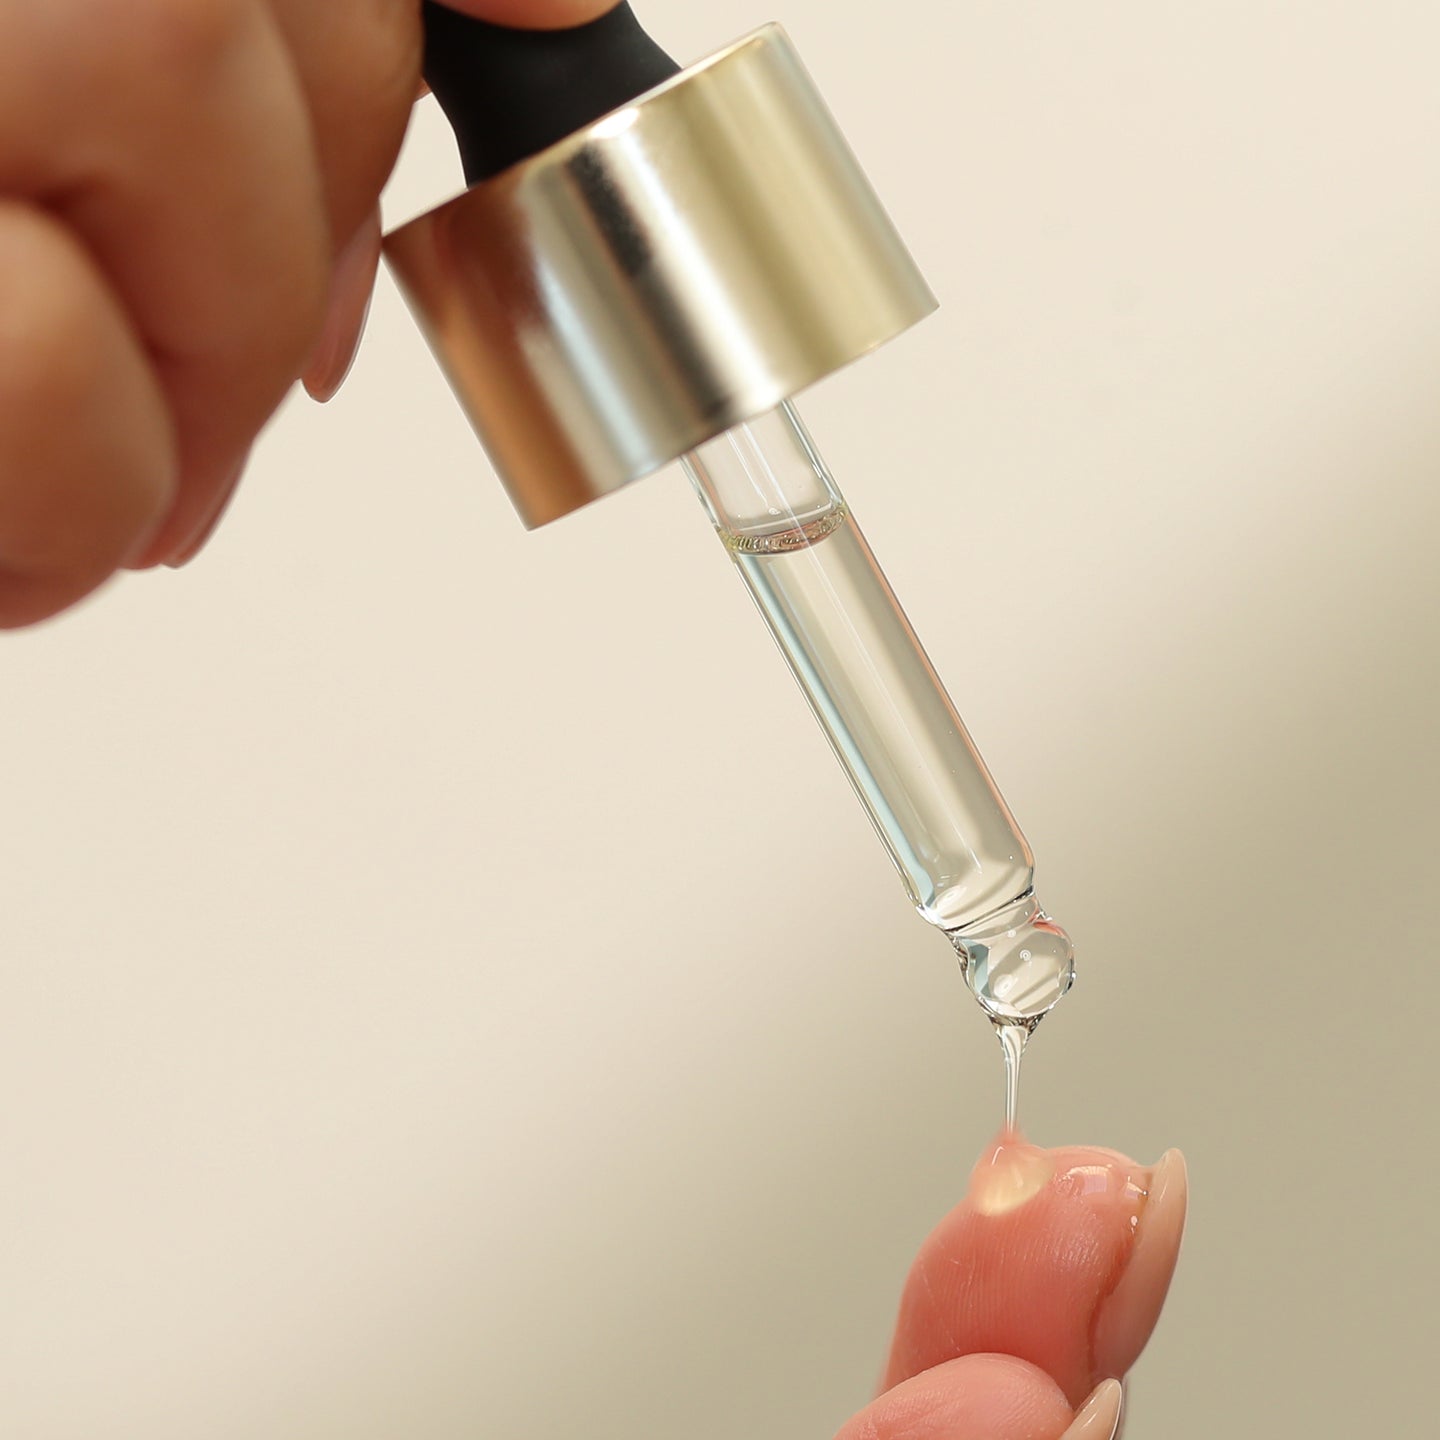 Image showing product applicator dropper putting product on fingers